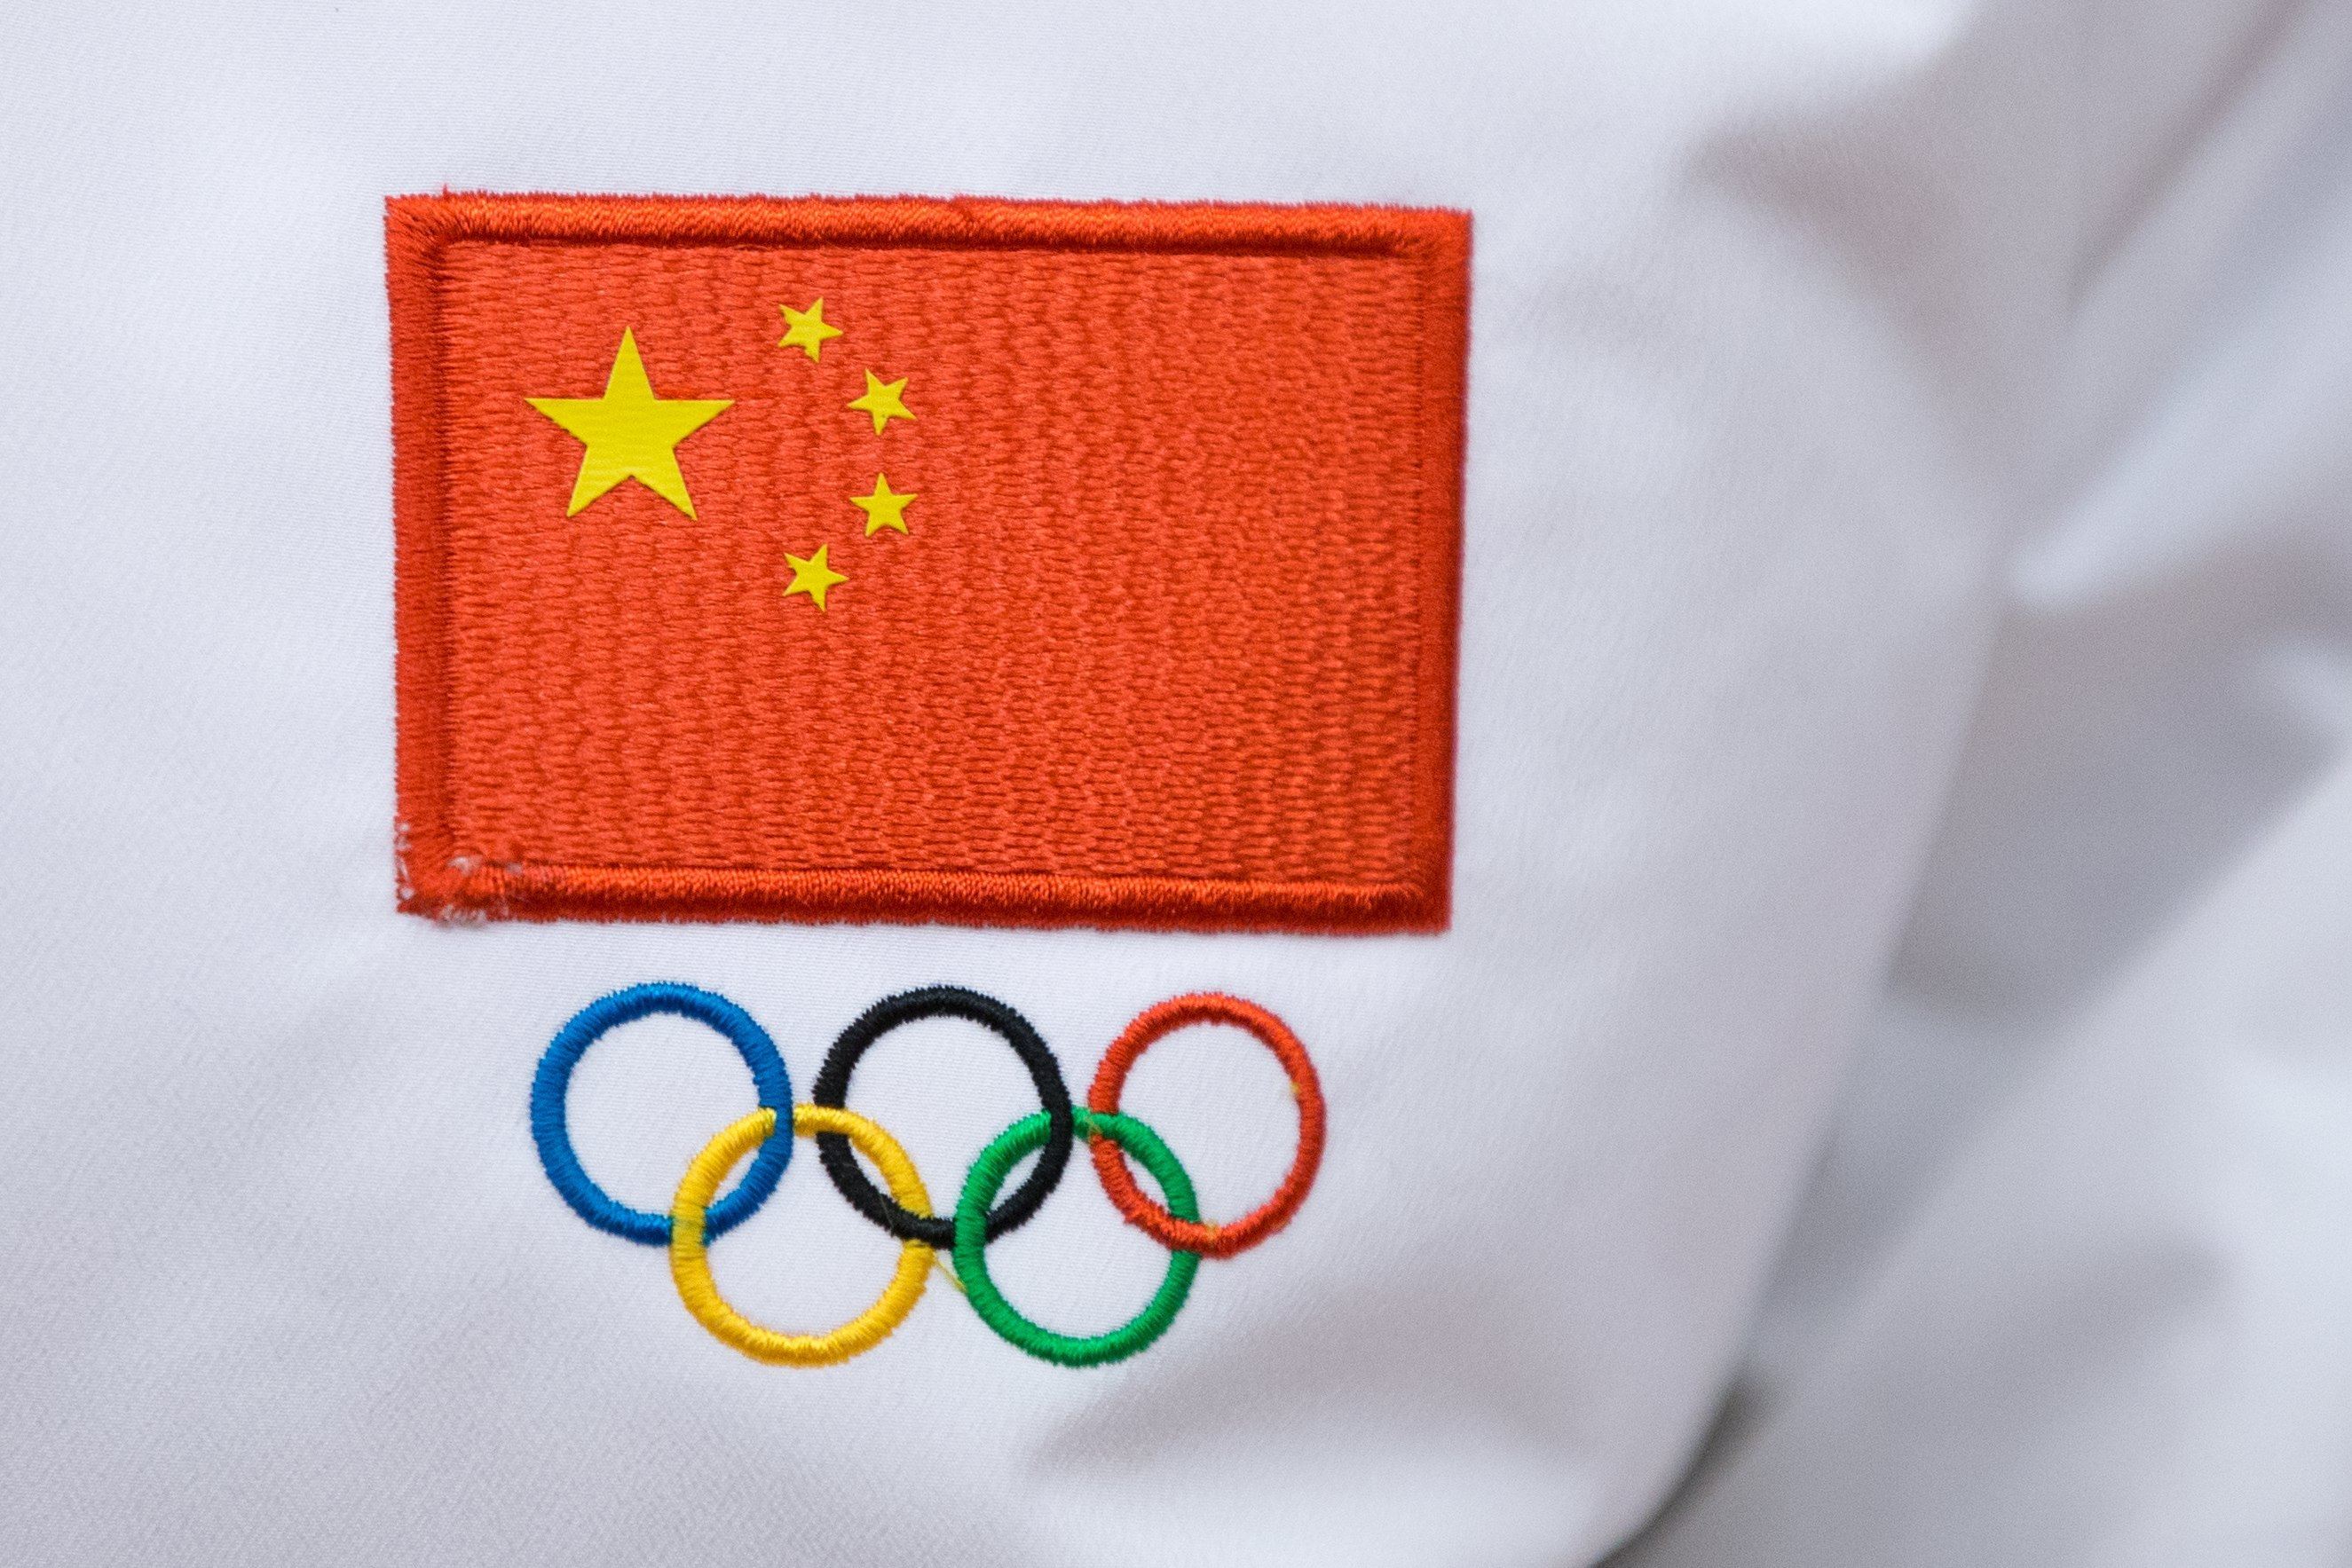 A Chinese flag and Olympic sign are seen on a jacket worn by a Chinese sportsman during a ceremony in Beijing in 2018. Photo: EPA